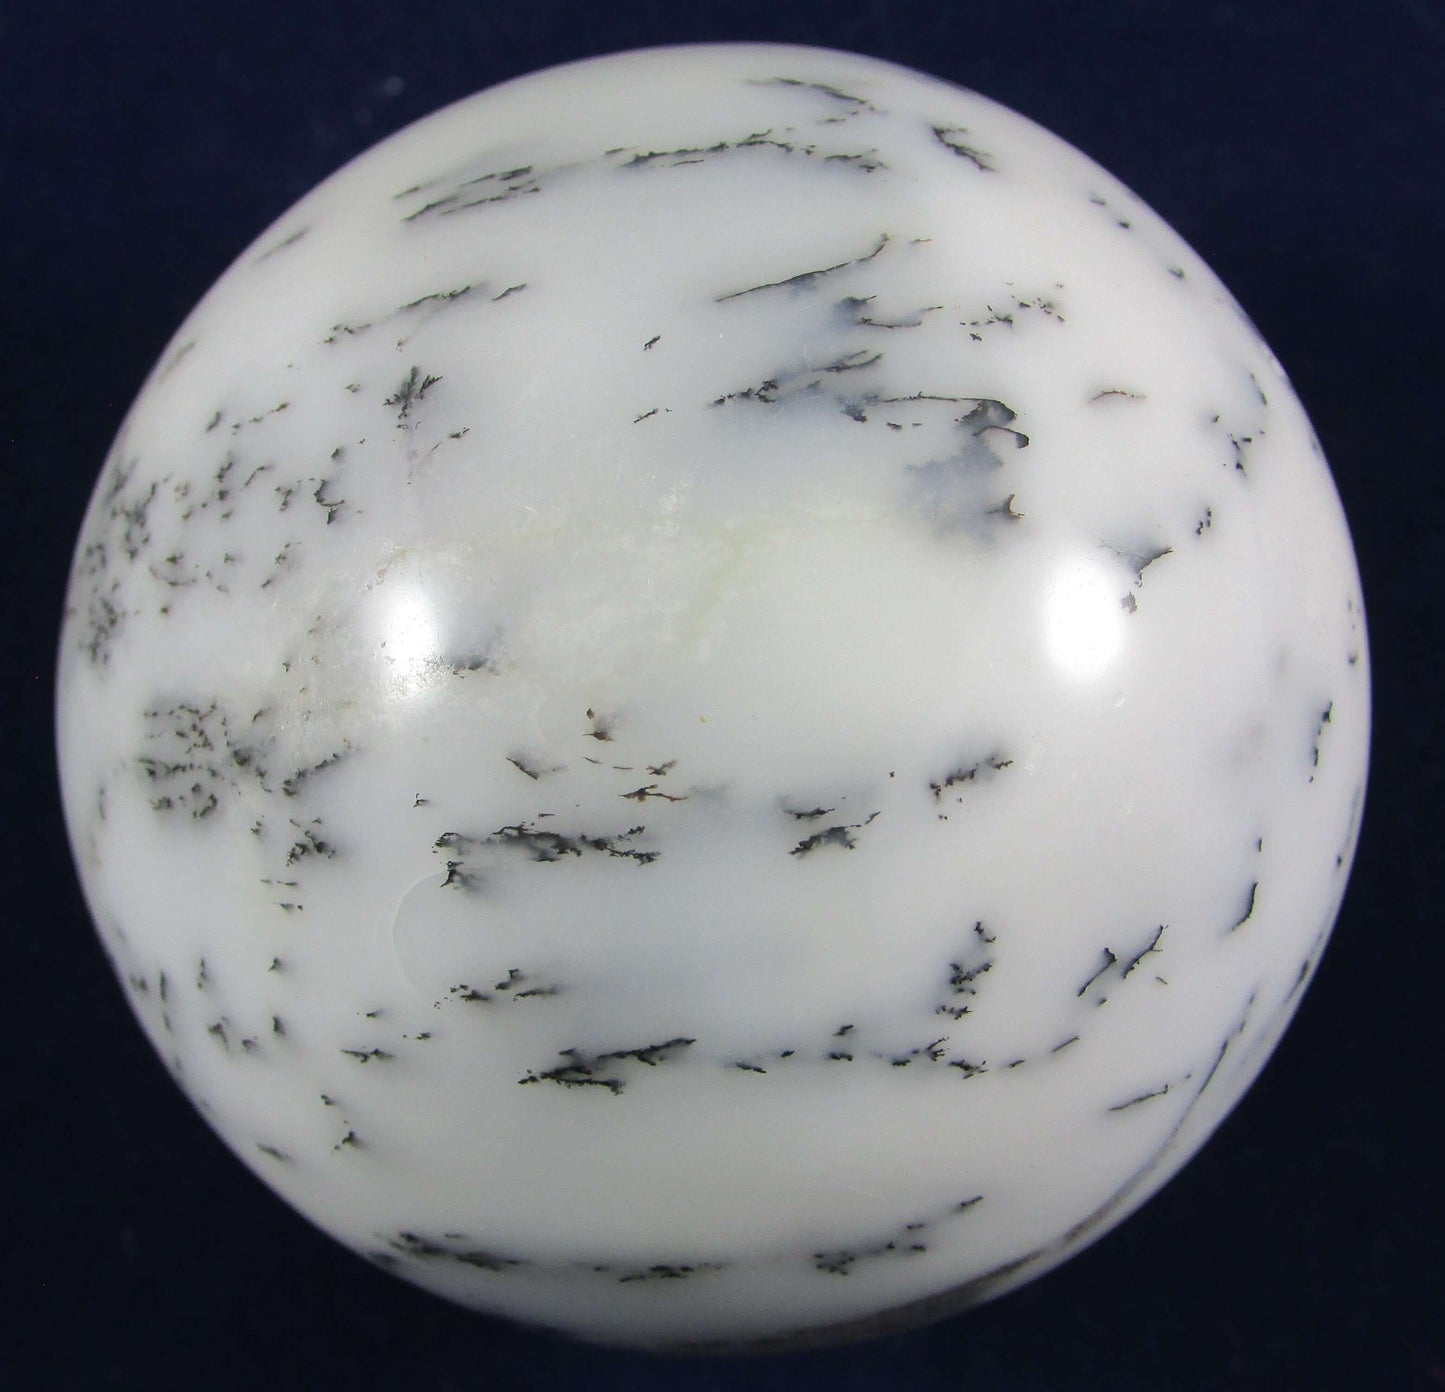 White Dendritic Opal Crystal Sphere, Crystal Ball